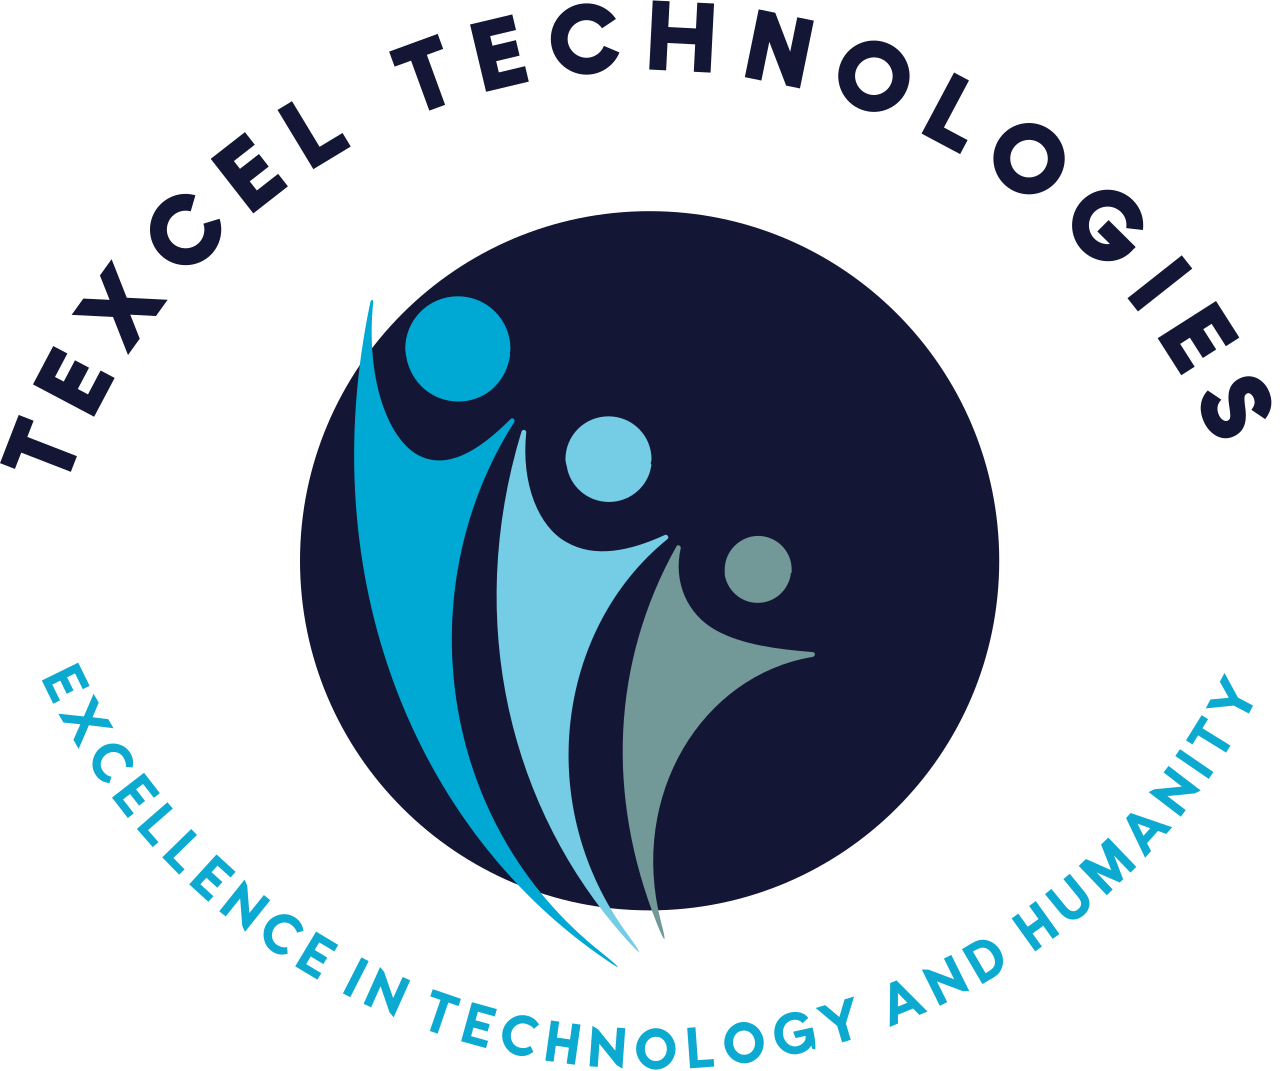 TEXCEL TECHNOLOGIES 's web page